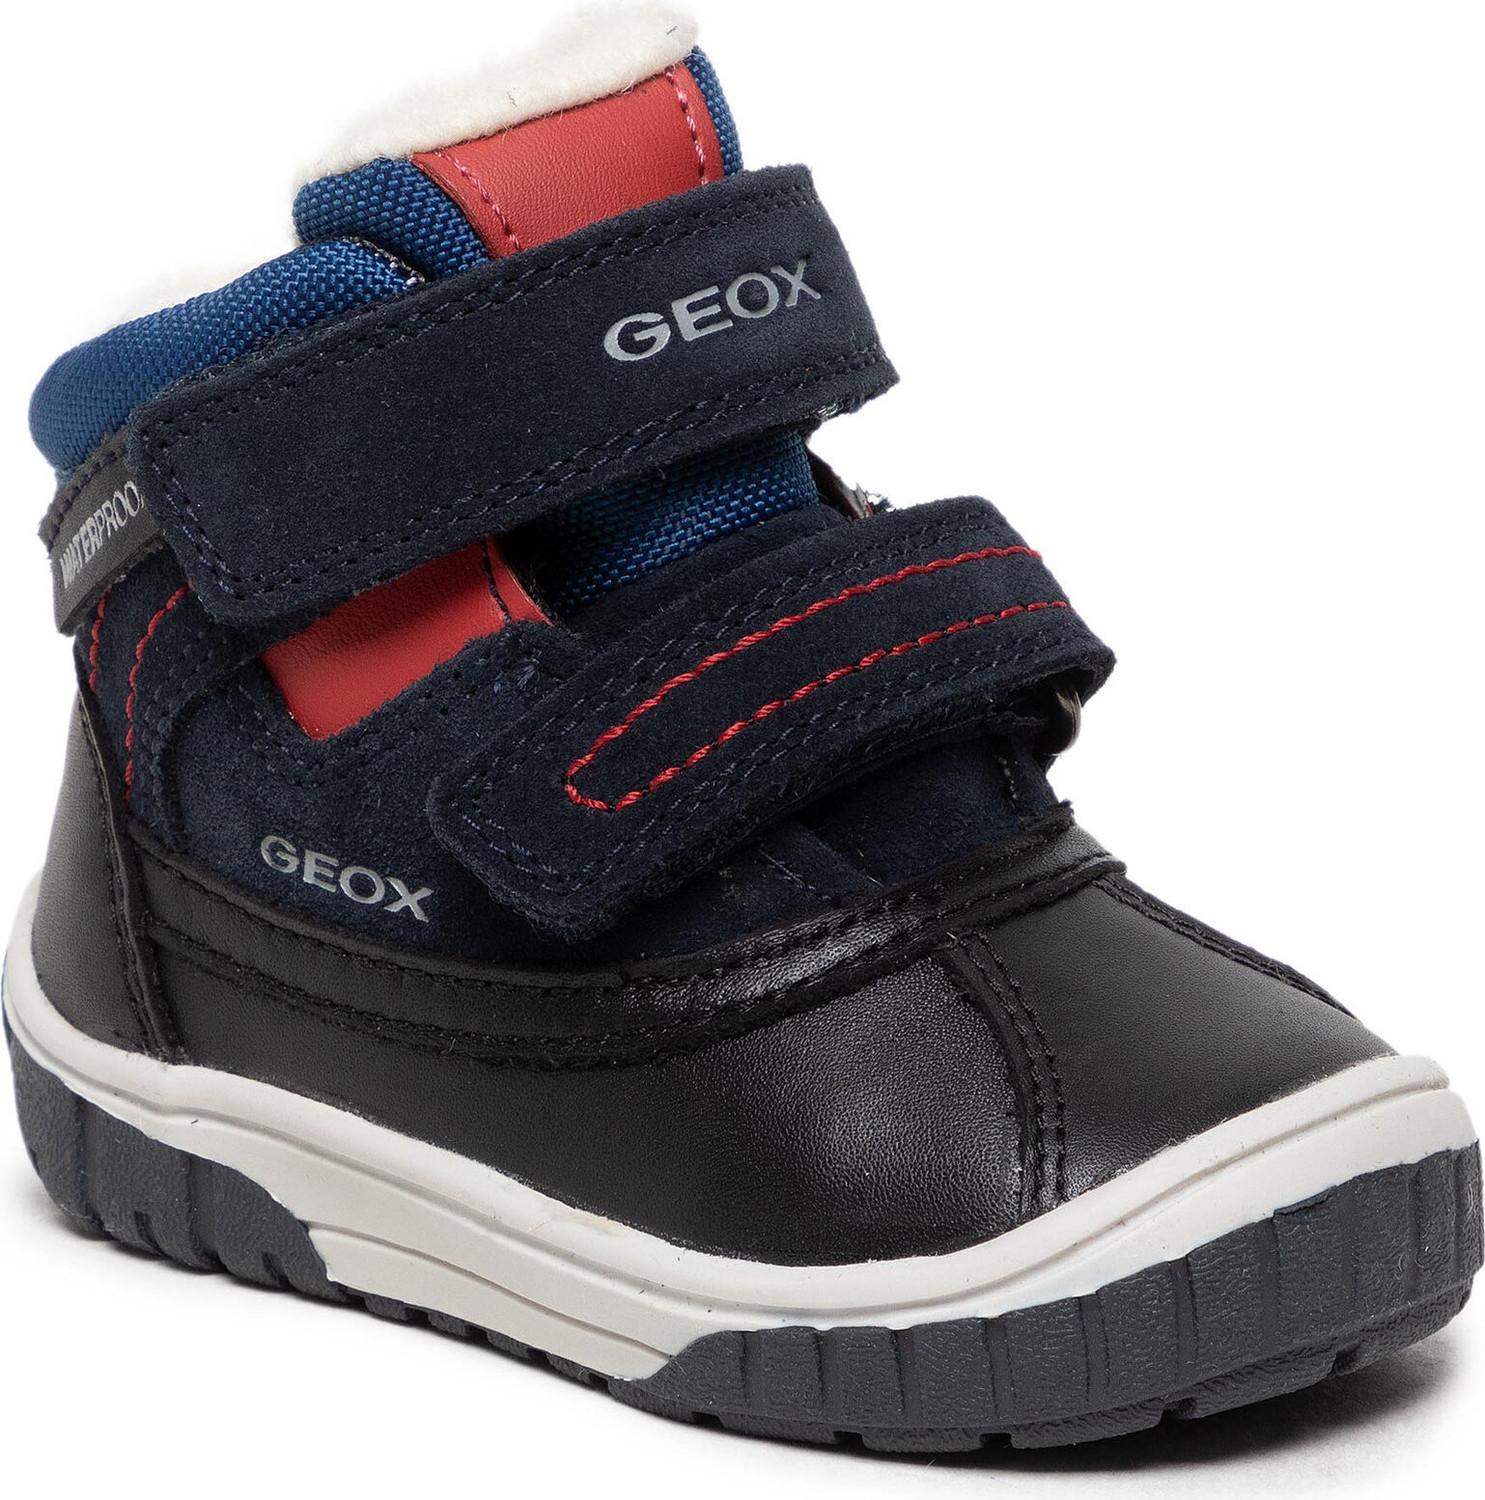 Snehule Geox B Omar B.Wpf B B162DB 022FU C4244 M Navy/Dk Red